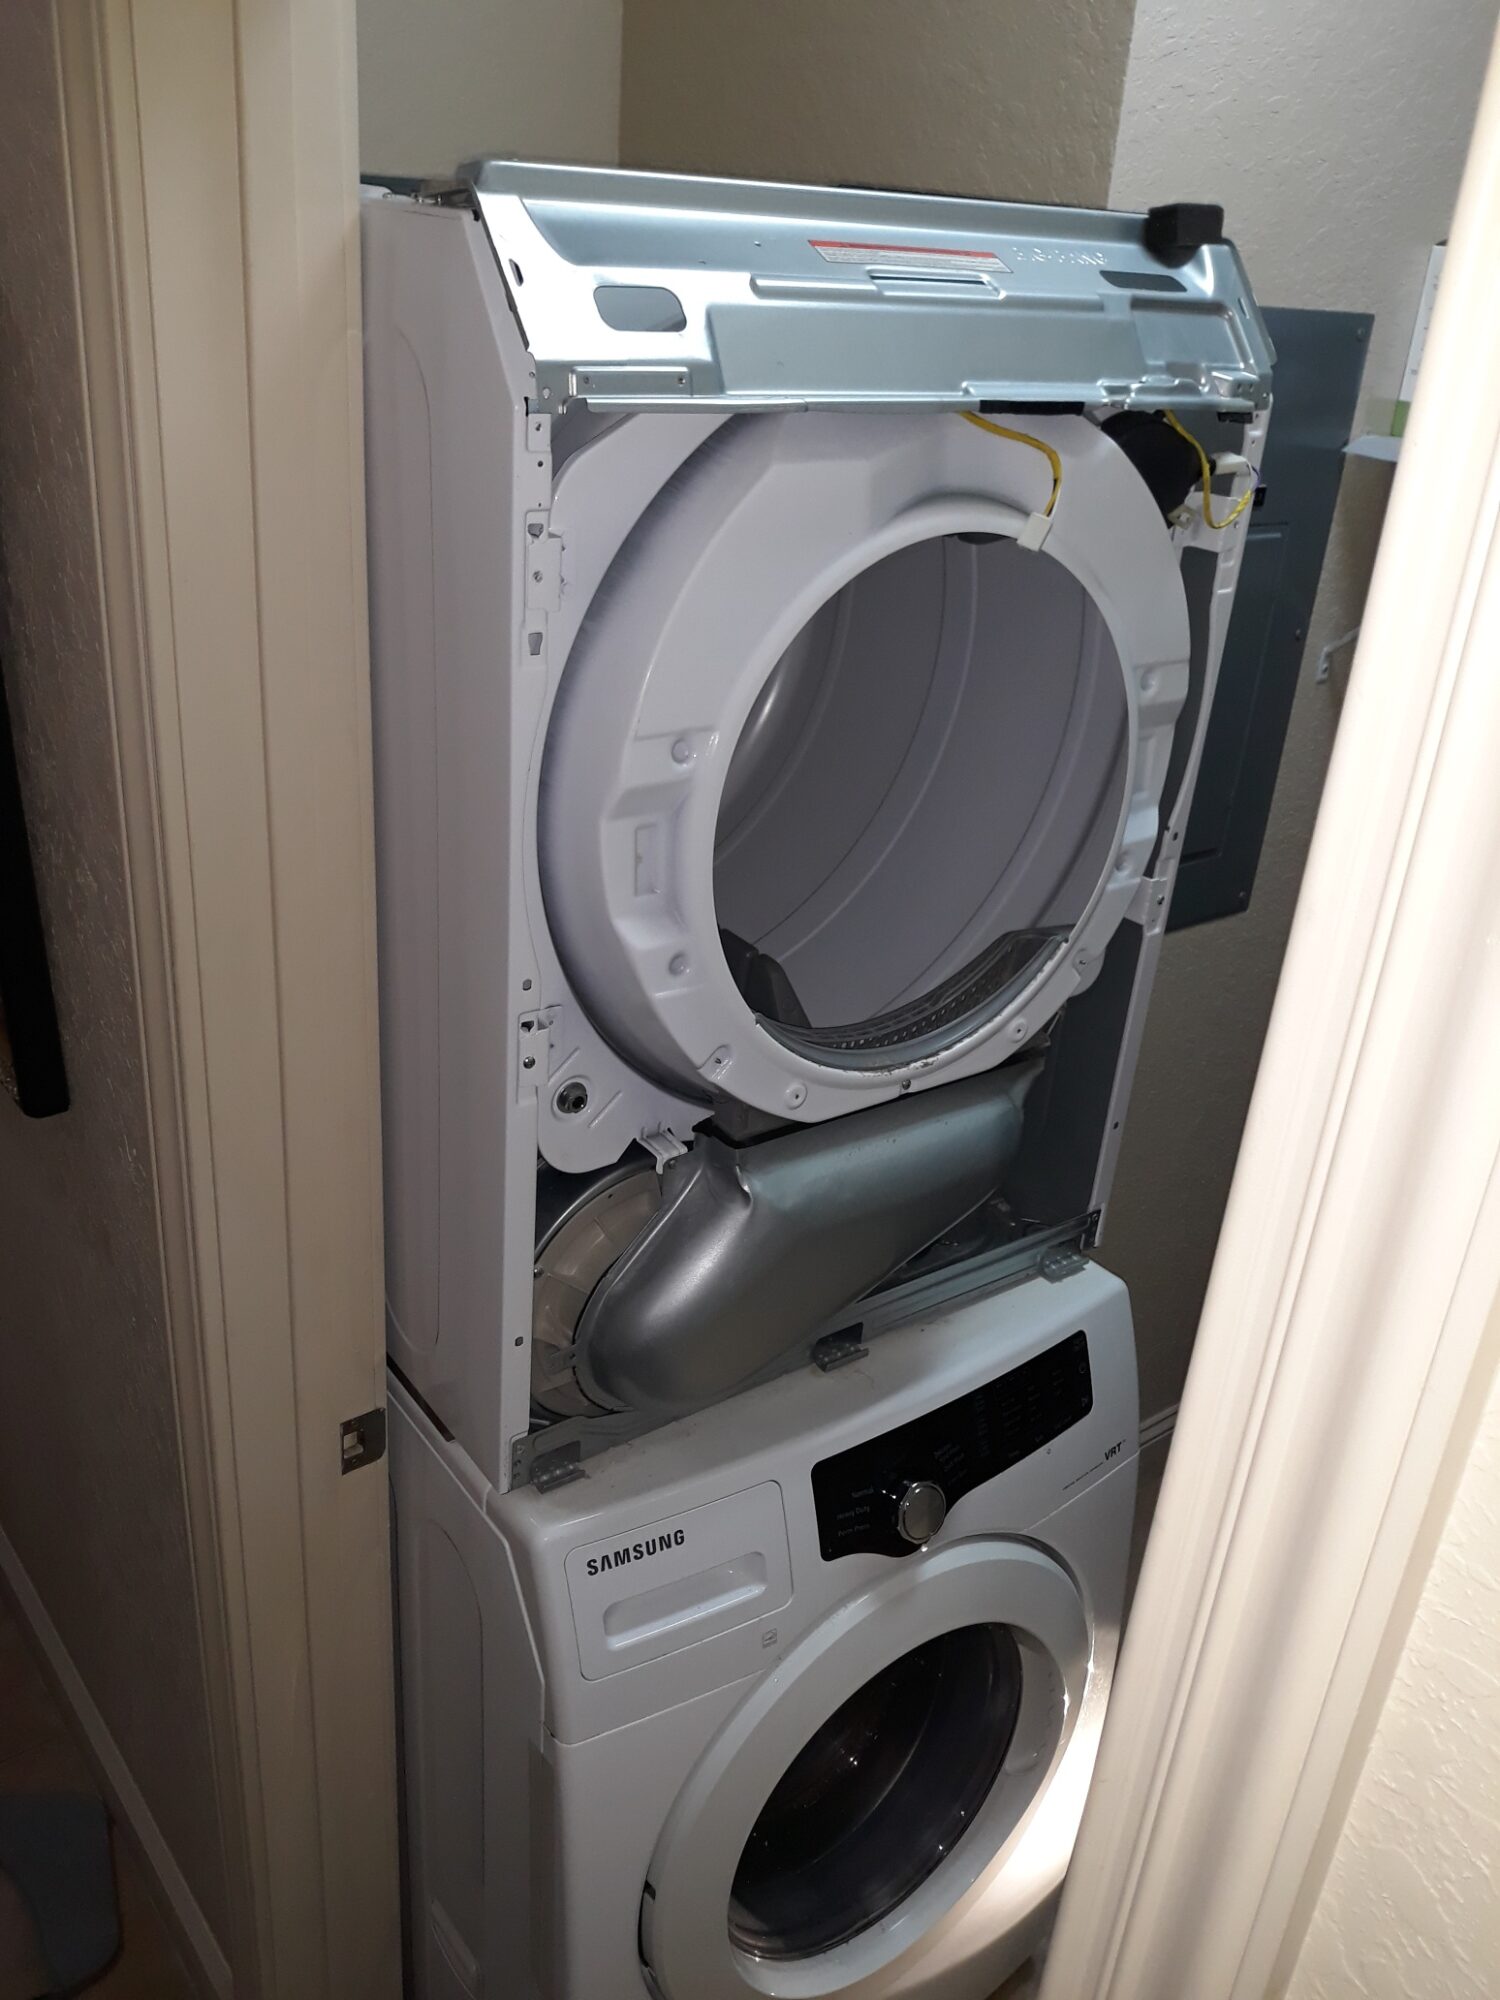 appliance repair dryer repair repair required 2 technician’s to pull from closet to access the back for disassembly jackson st eustis fl 32726